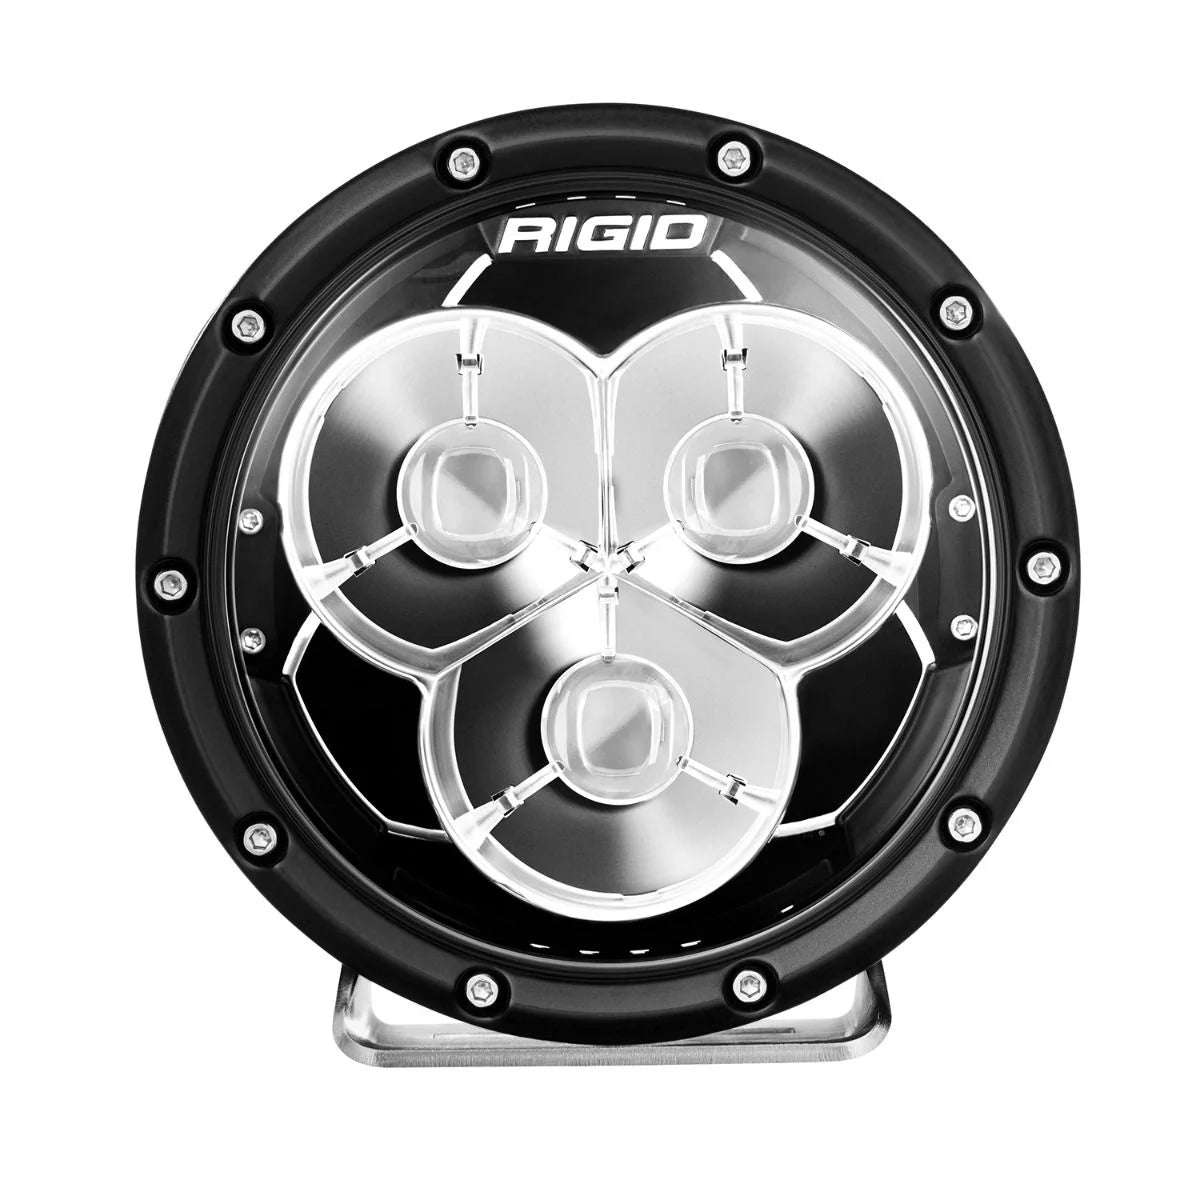 Rigid Industries 6 Inch 360-Series Laser With Precision Spot Optics and Amber Backlight - 36211